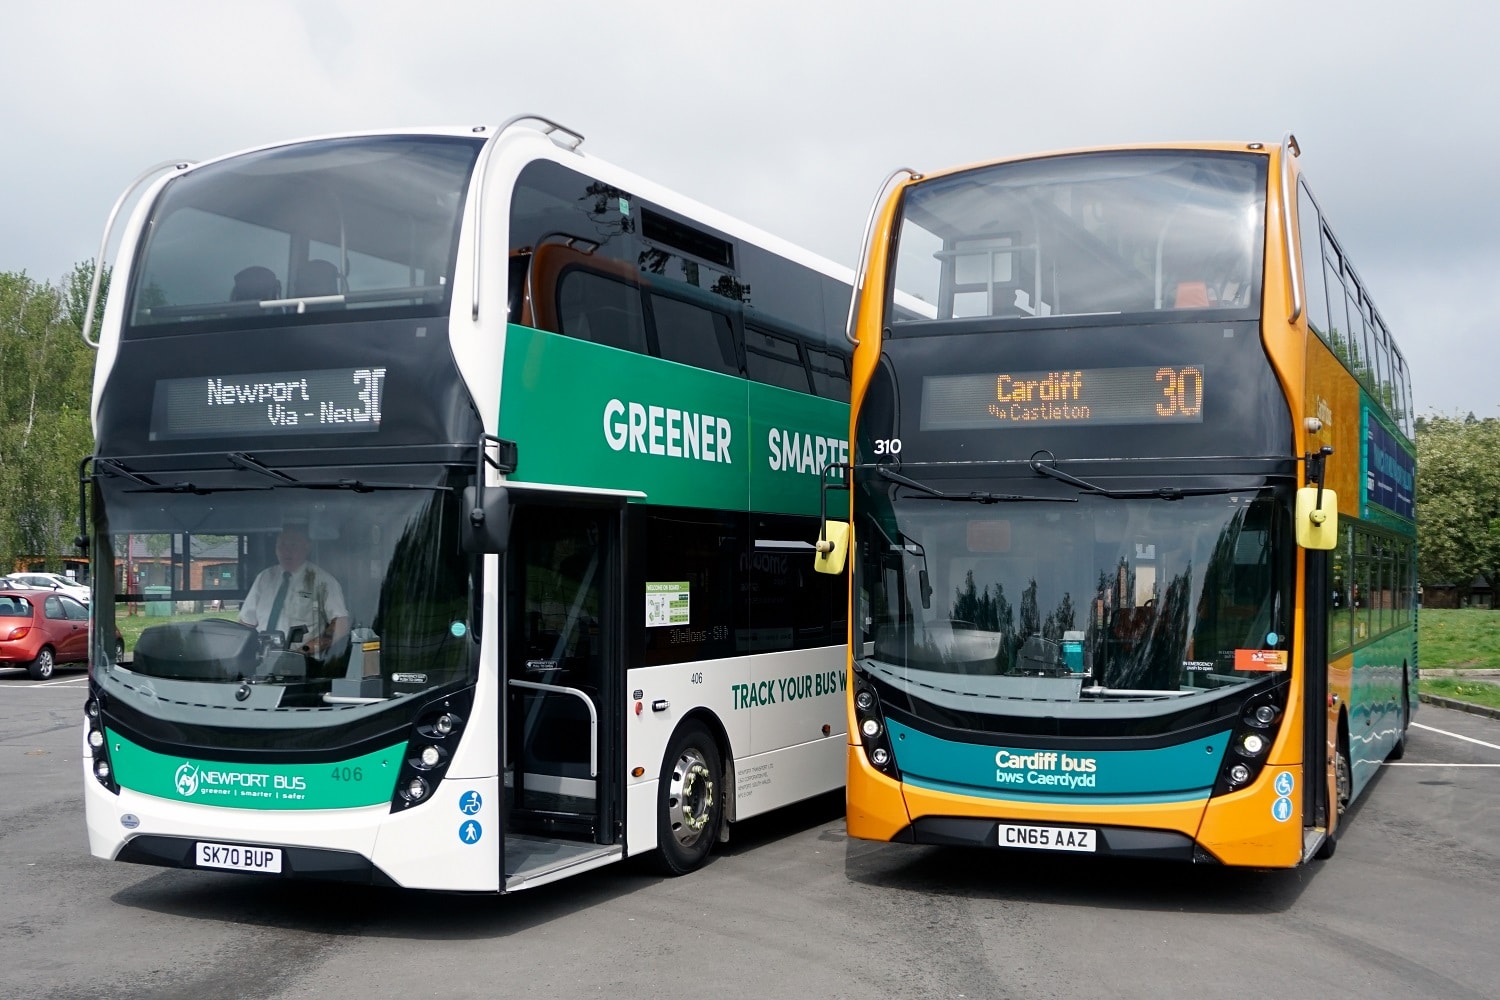 Newport Bus and Cardiff Bus